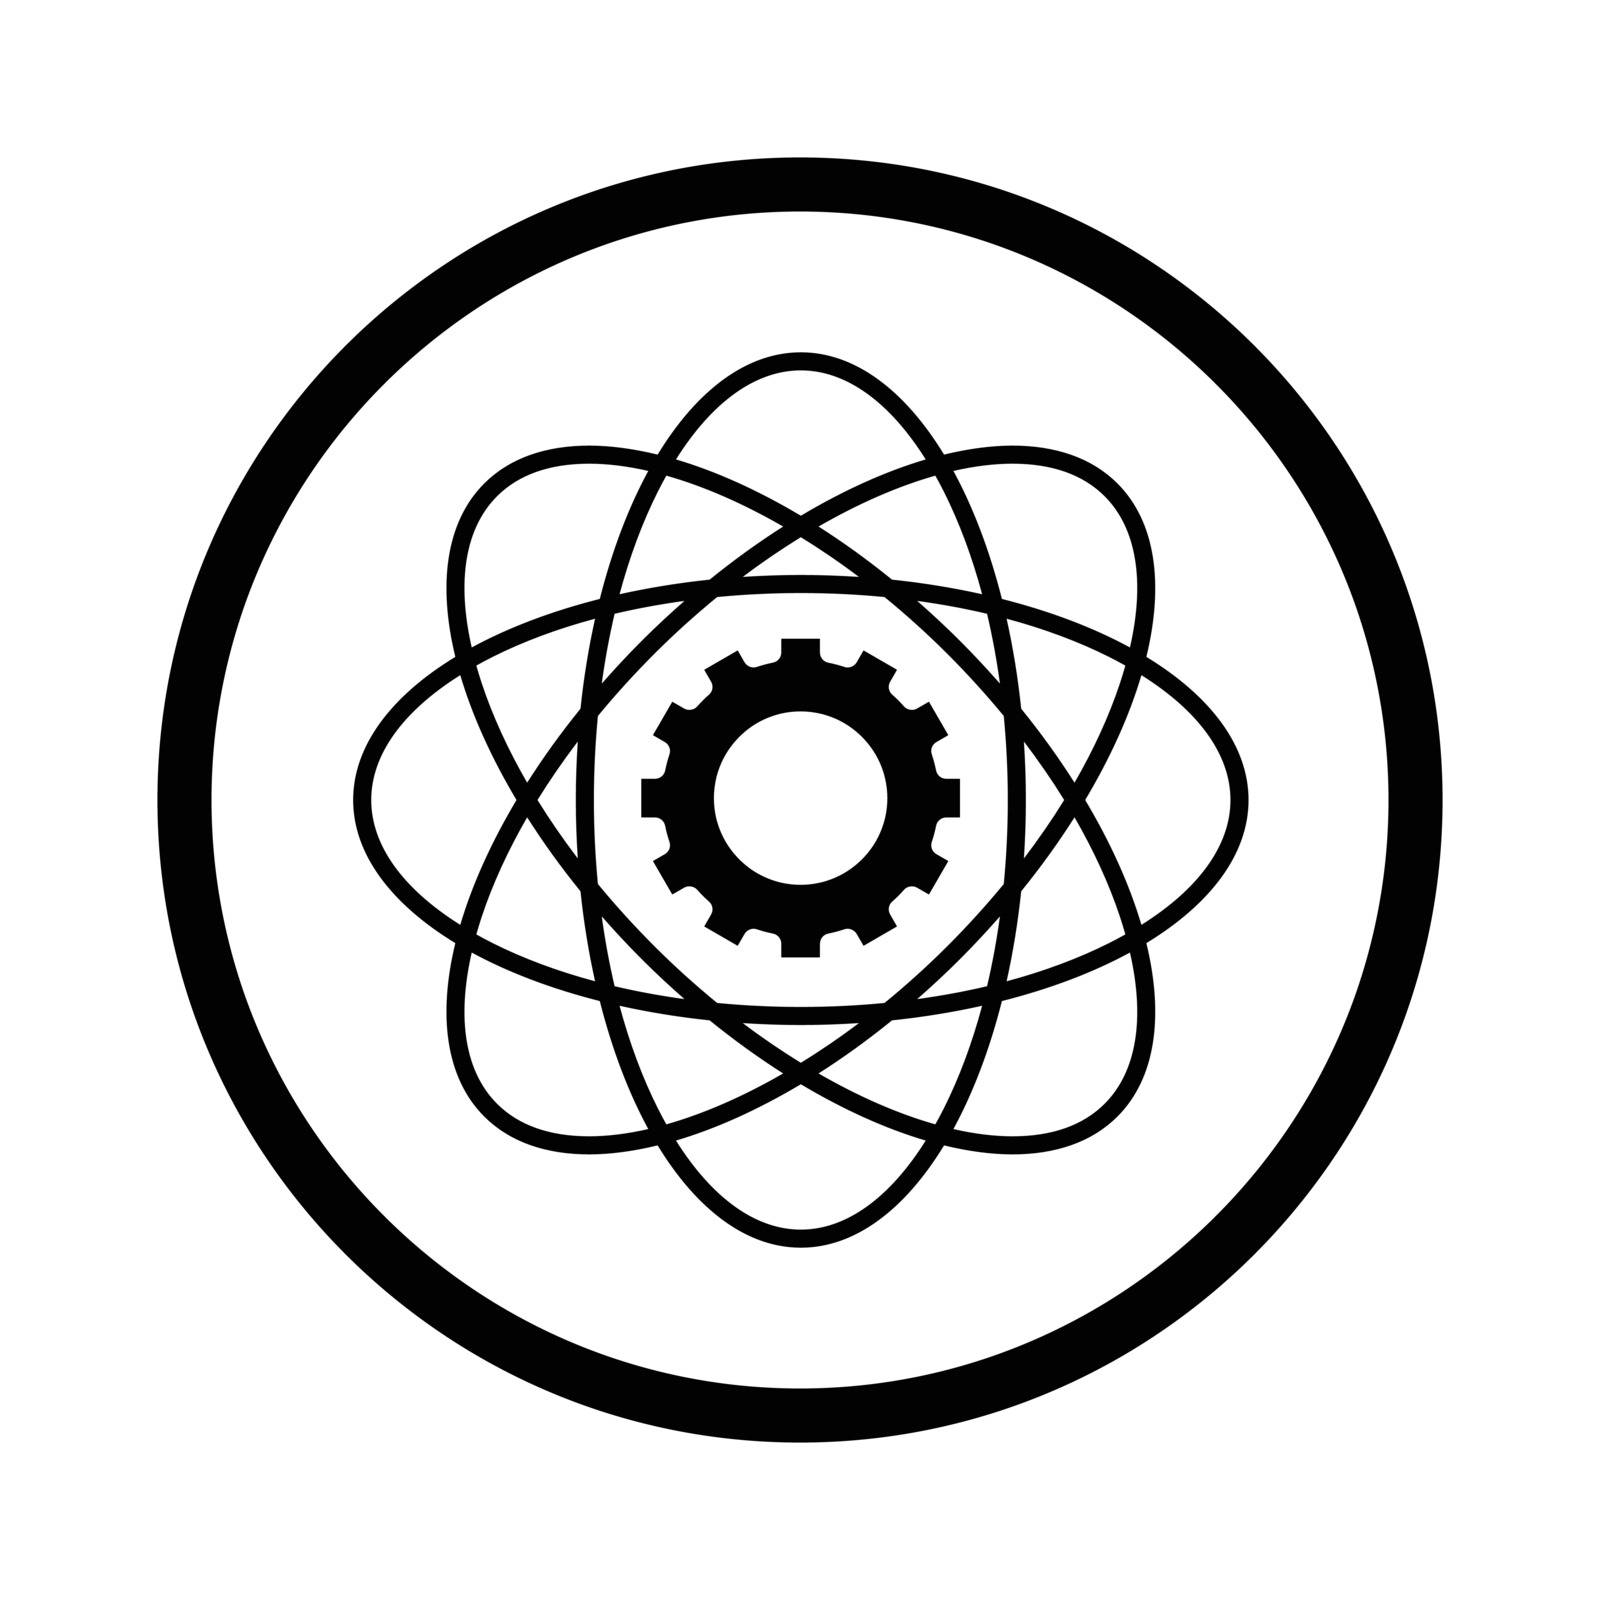 Science icon, iconic symbol inside a circle, on white background. Vector Iconic Design.